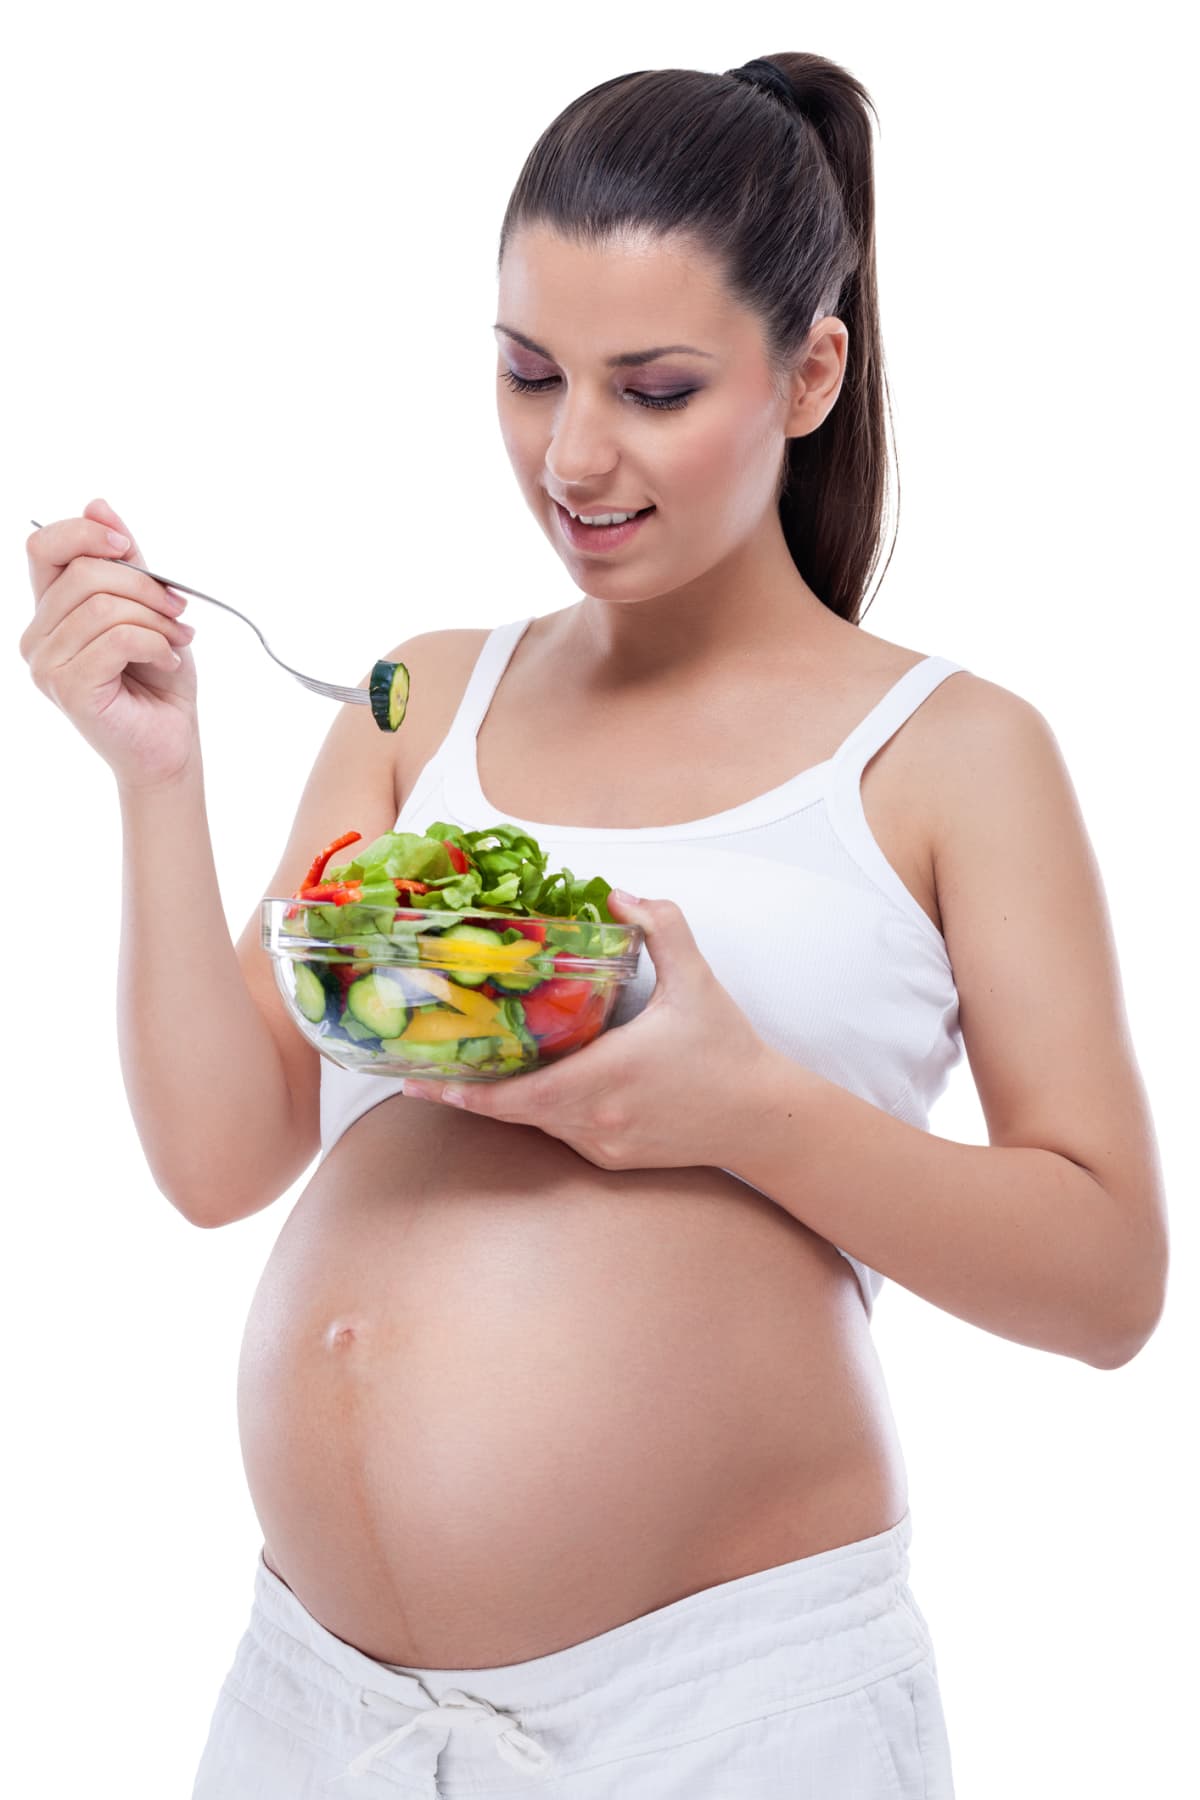 young pregnant woman eating healthy vegetable salad, healthy nutrition and pregnancy